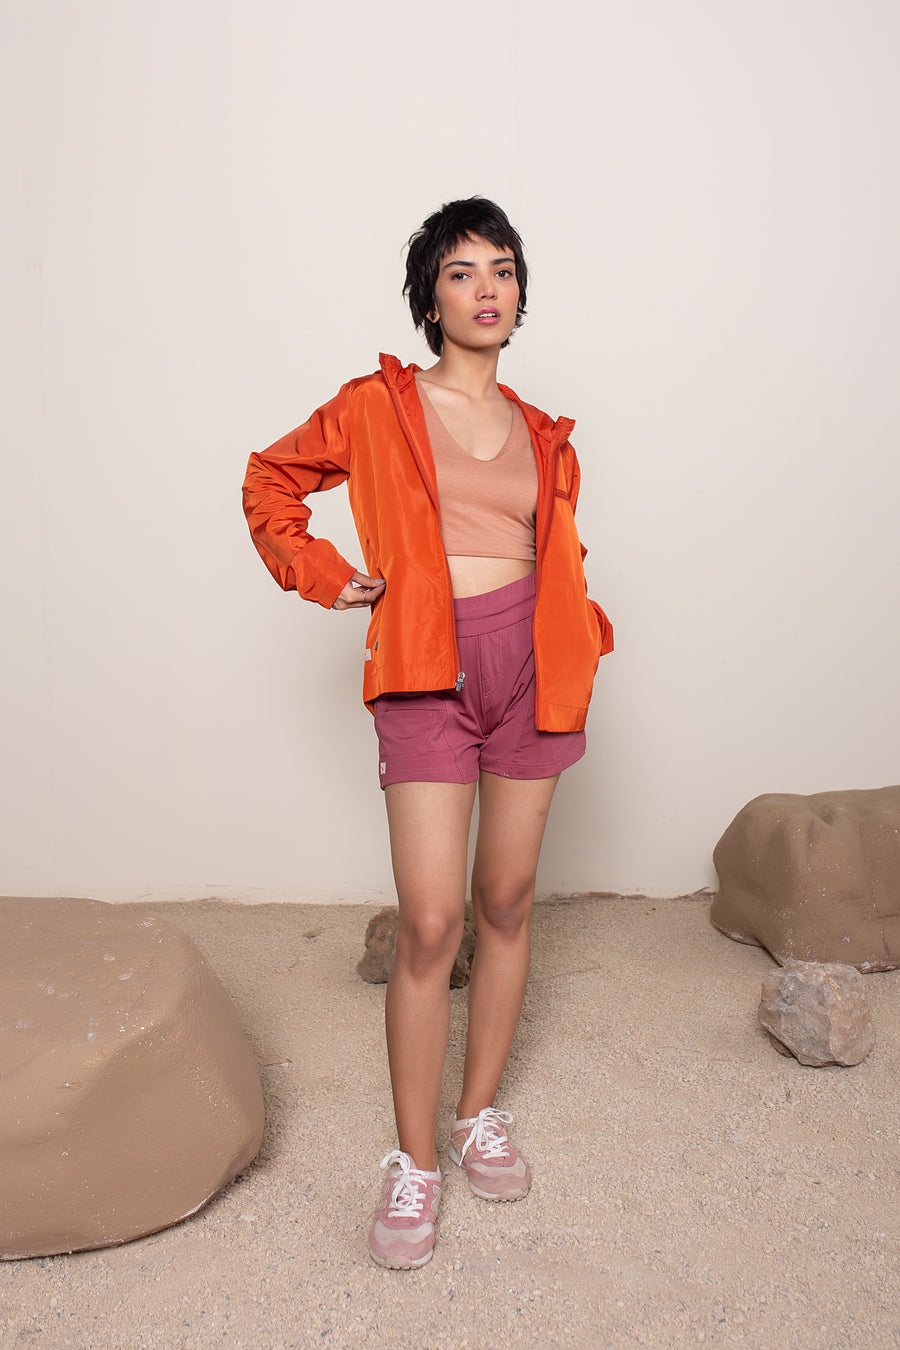 Women's Windansea Jacket in Orange | VOLO Apparel | The ultimate all year jacket, an ultralight hooded windbreaker, crafted with the revolutionary memory fabric and five pockets. This jacket is full of features, water repellant, three zipper pockets, UPF 50 protection from the sun and tailored fit to look super stylish while being ready for any adventure.